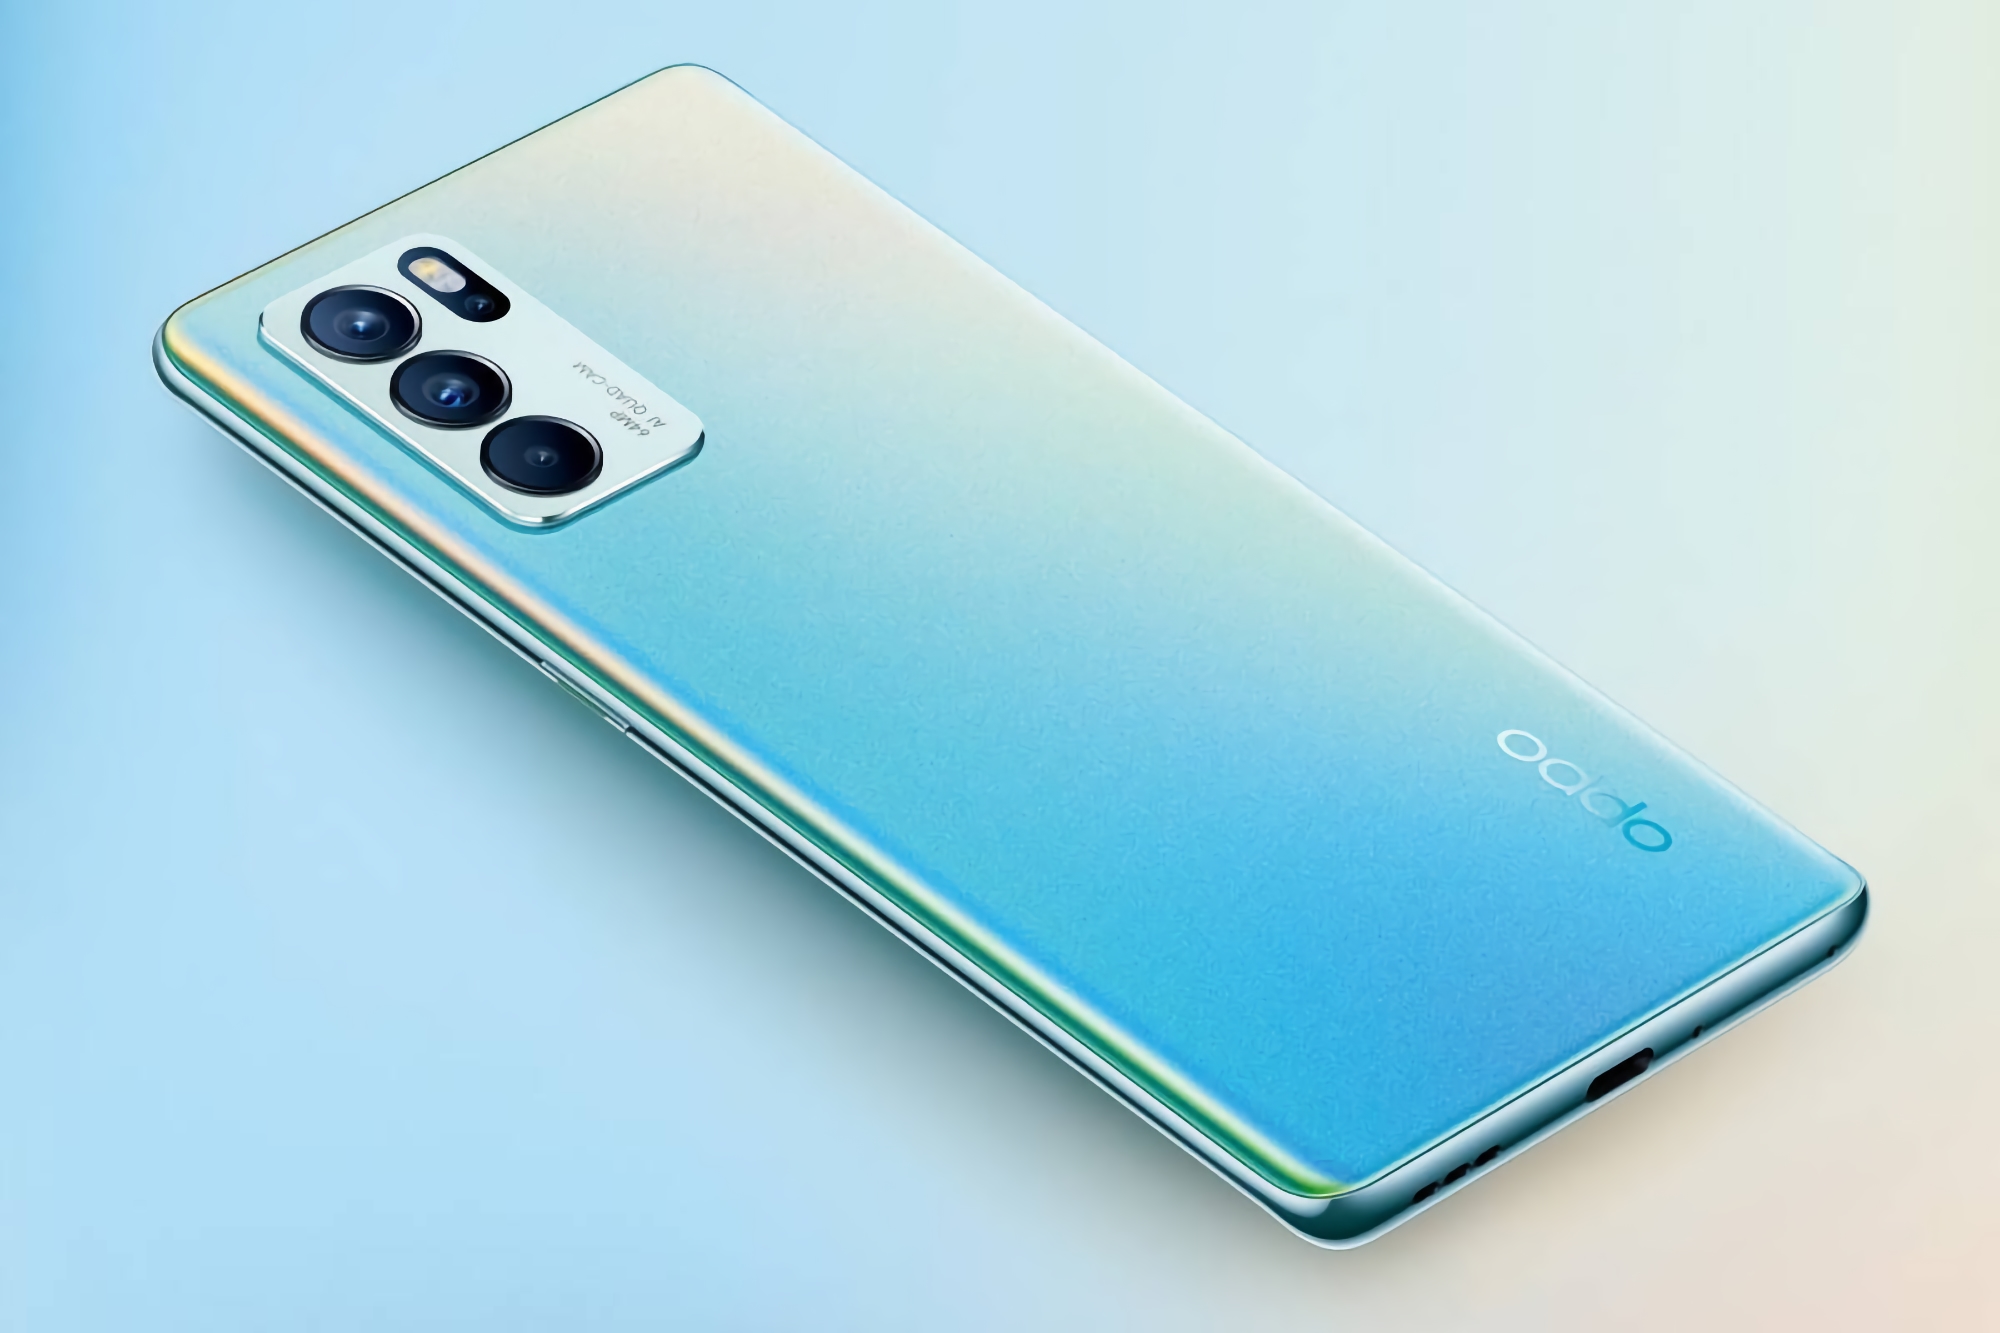 OPPO Reno 6 Pro 5G, OPPO Reno 6 Pro + 5G and OPPO Reno 5 Pro 5G get ColorOS 12 stable version with Android 12 on board